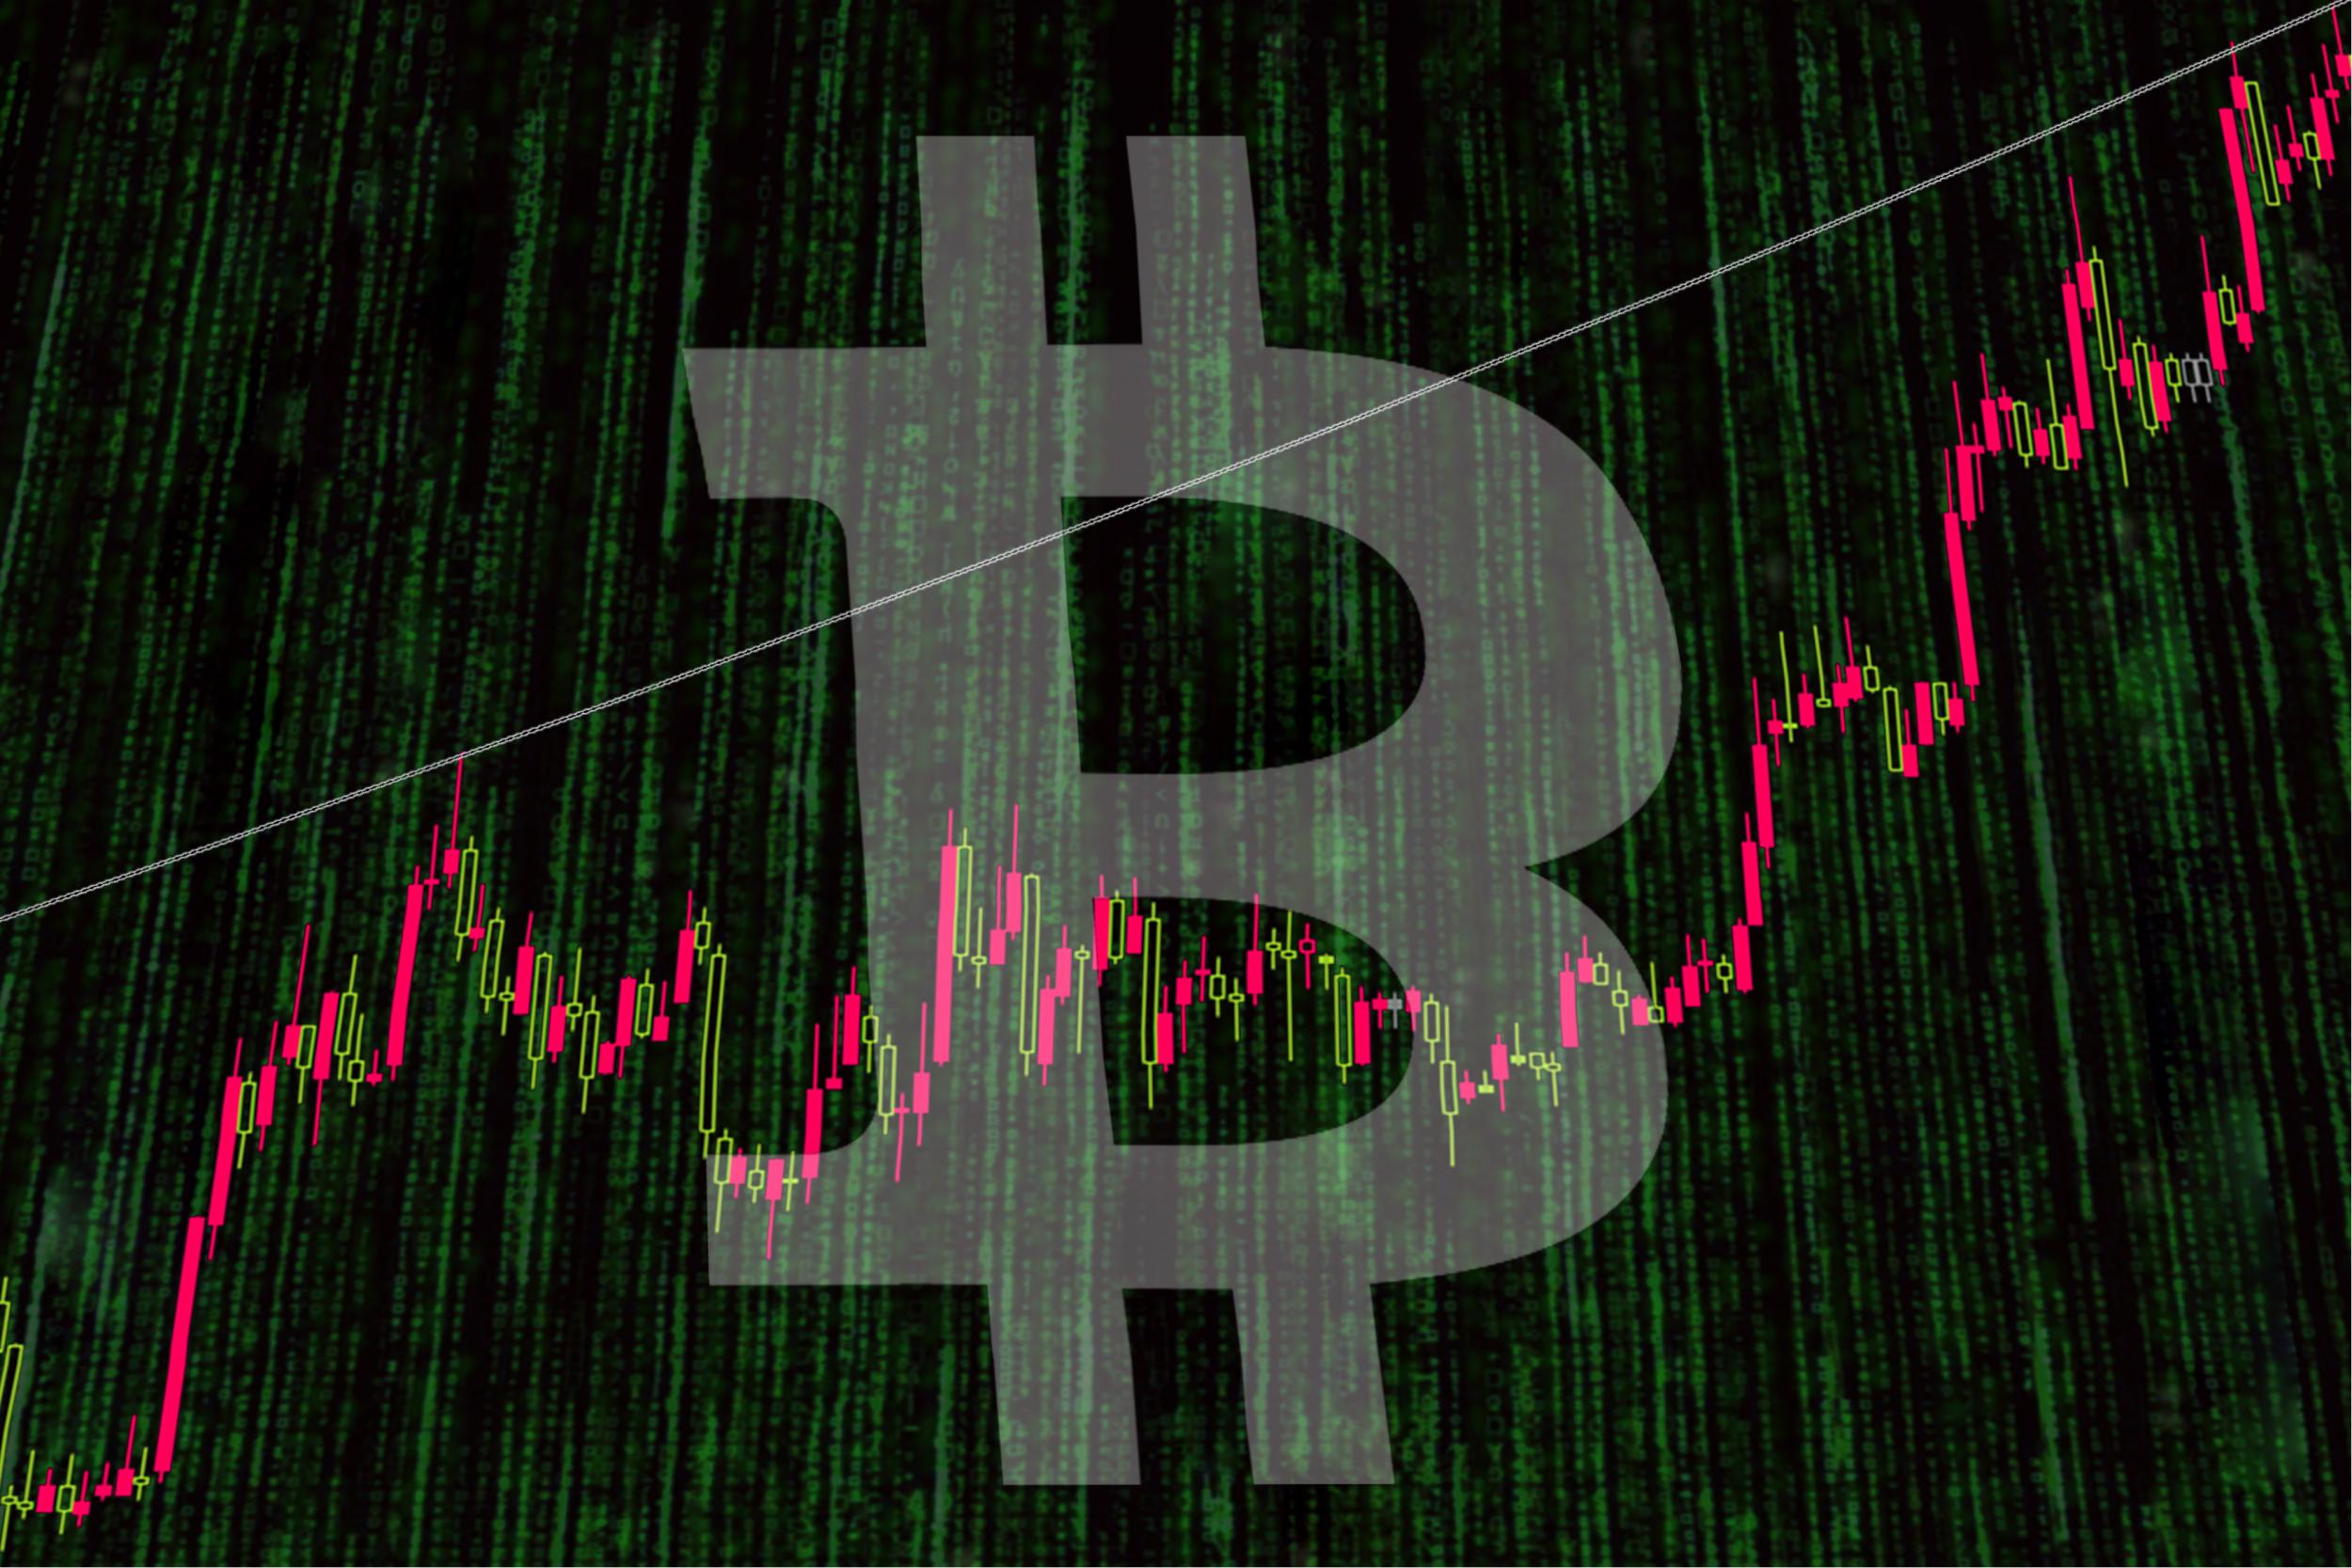 Bitcoin Price Live Cryptocurrency Value Plummets Below 7 000 - 